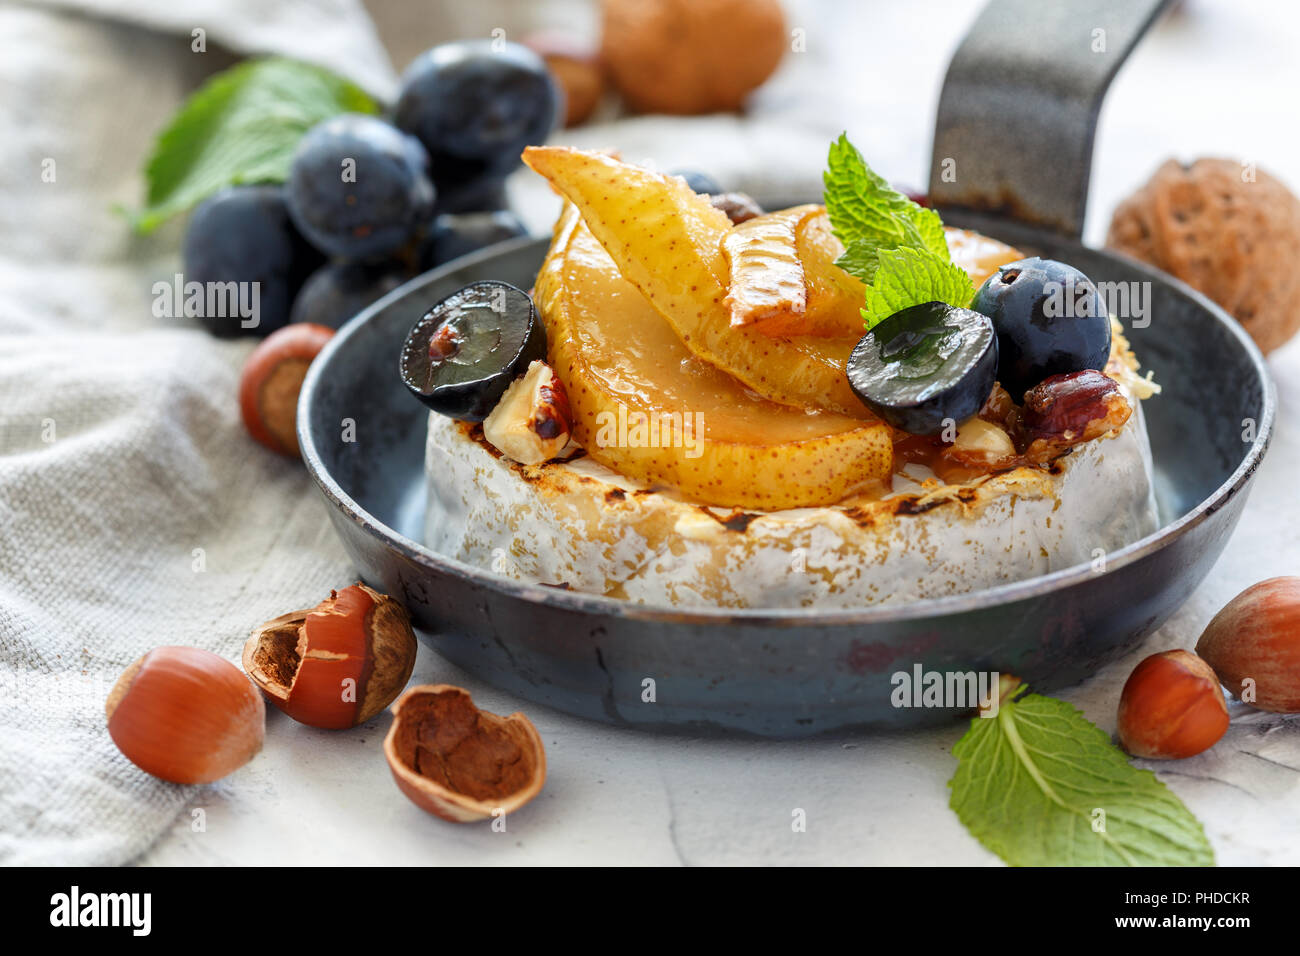 Grilled camembert with pears and black grapes. Stock Photo